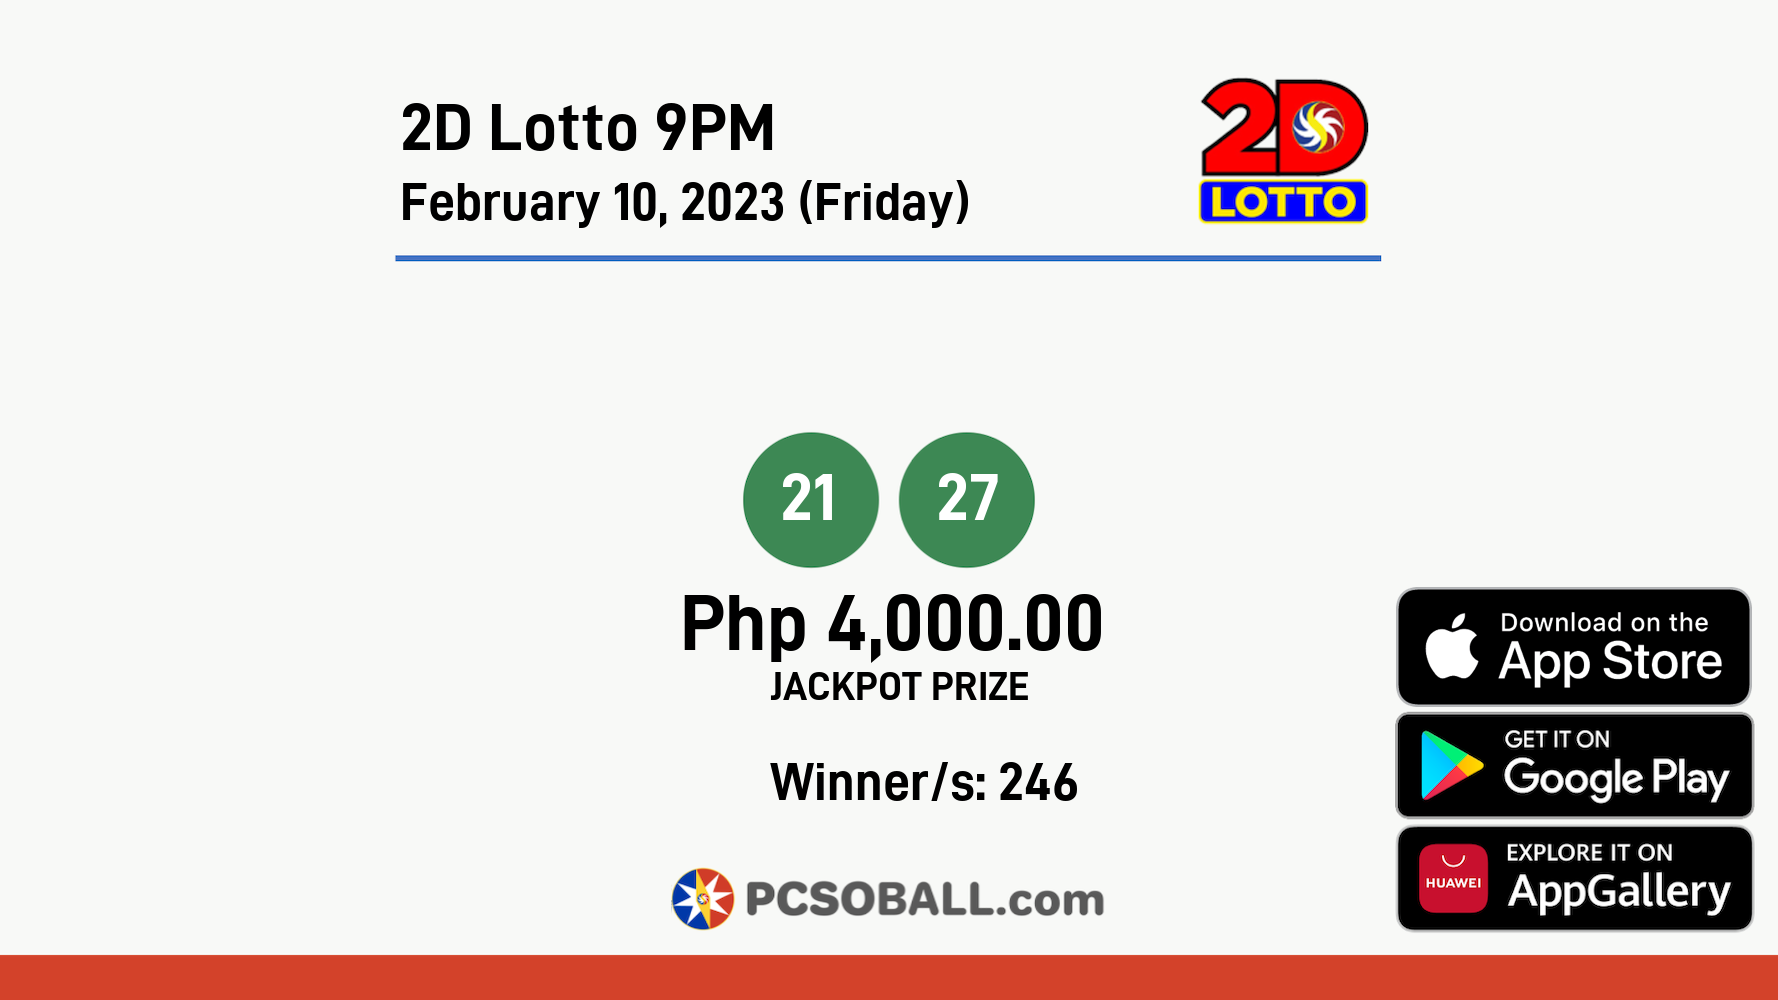 2D Lotto 9PM February 10, 2023 (Friday) Result